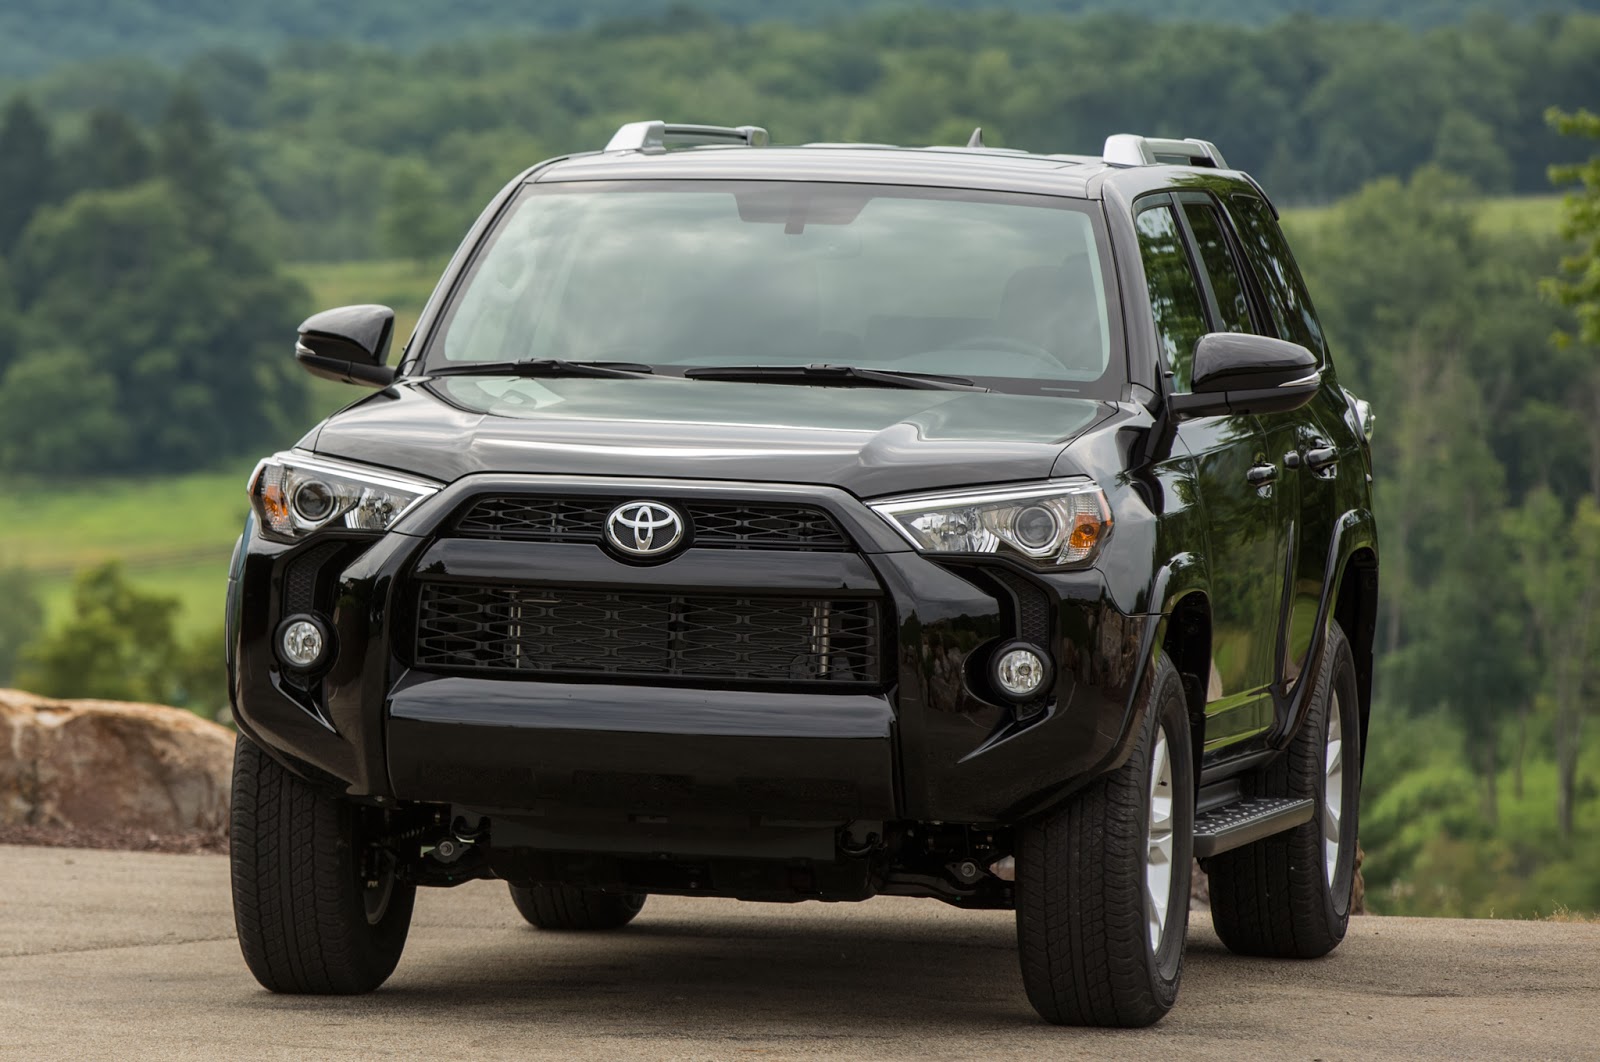 2014 Toyota 4Runner Price | Car Release Date, Price and Review